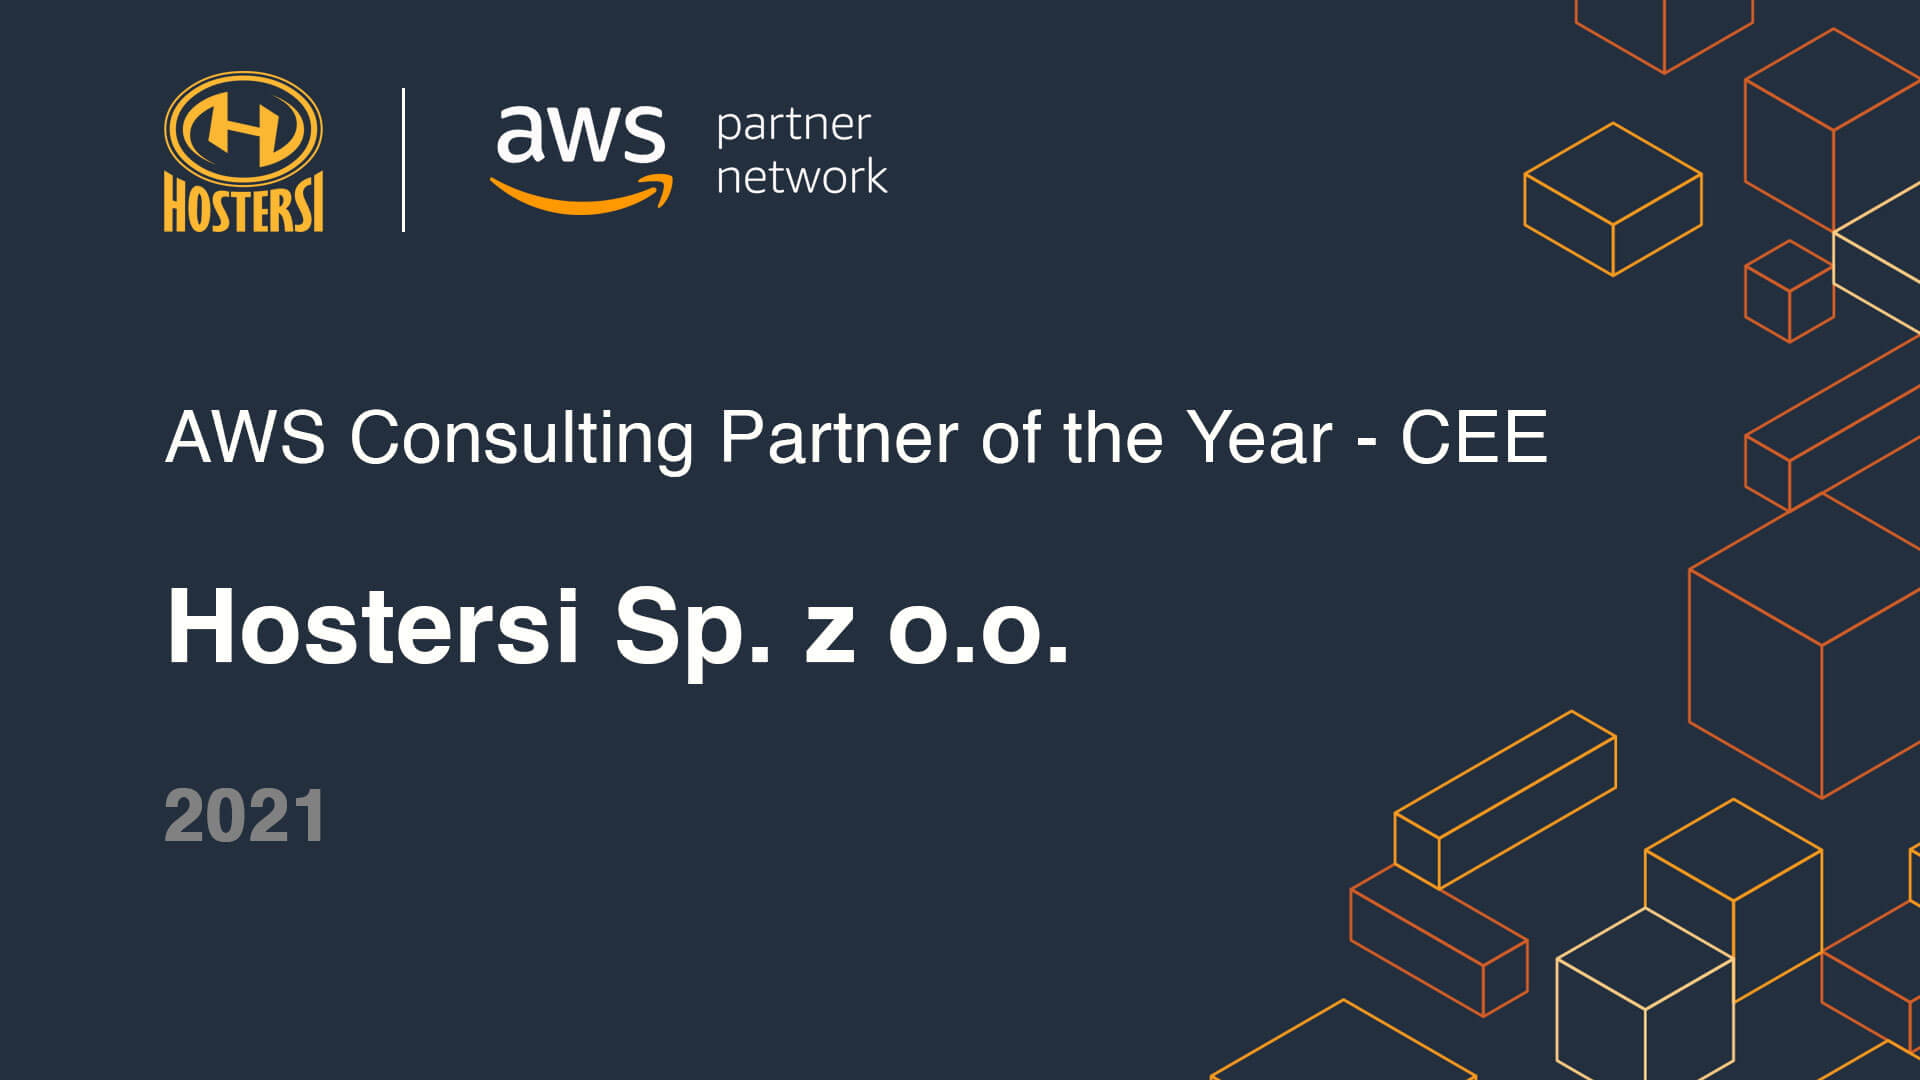 hostersi z nagrodą aws consulting partner of the year